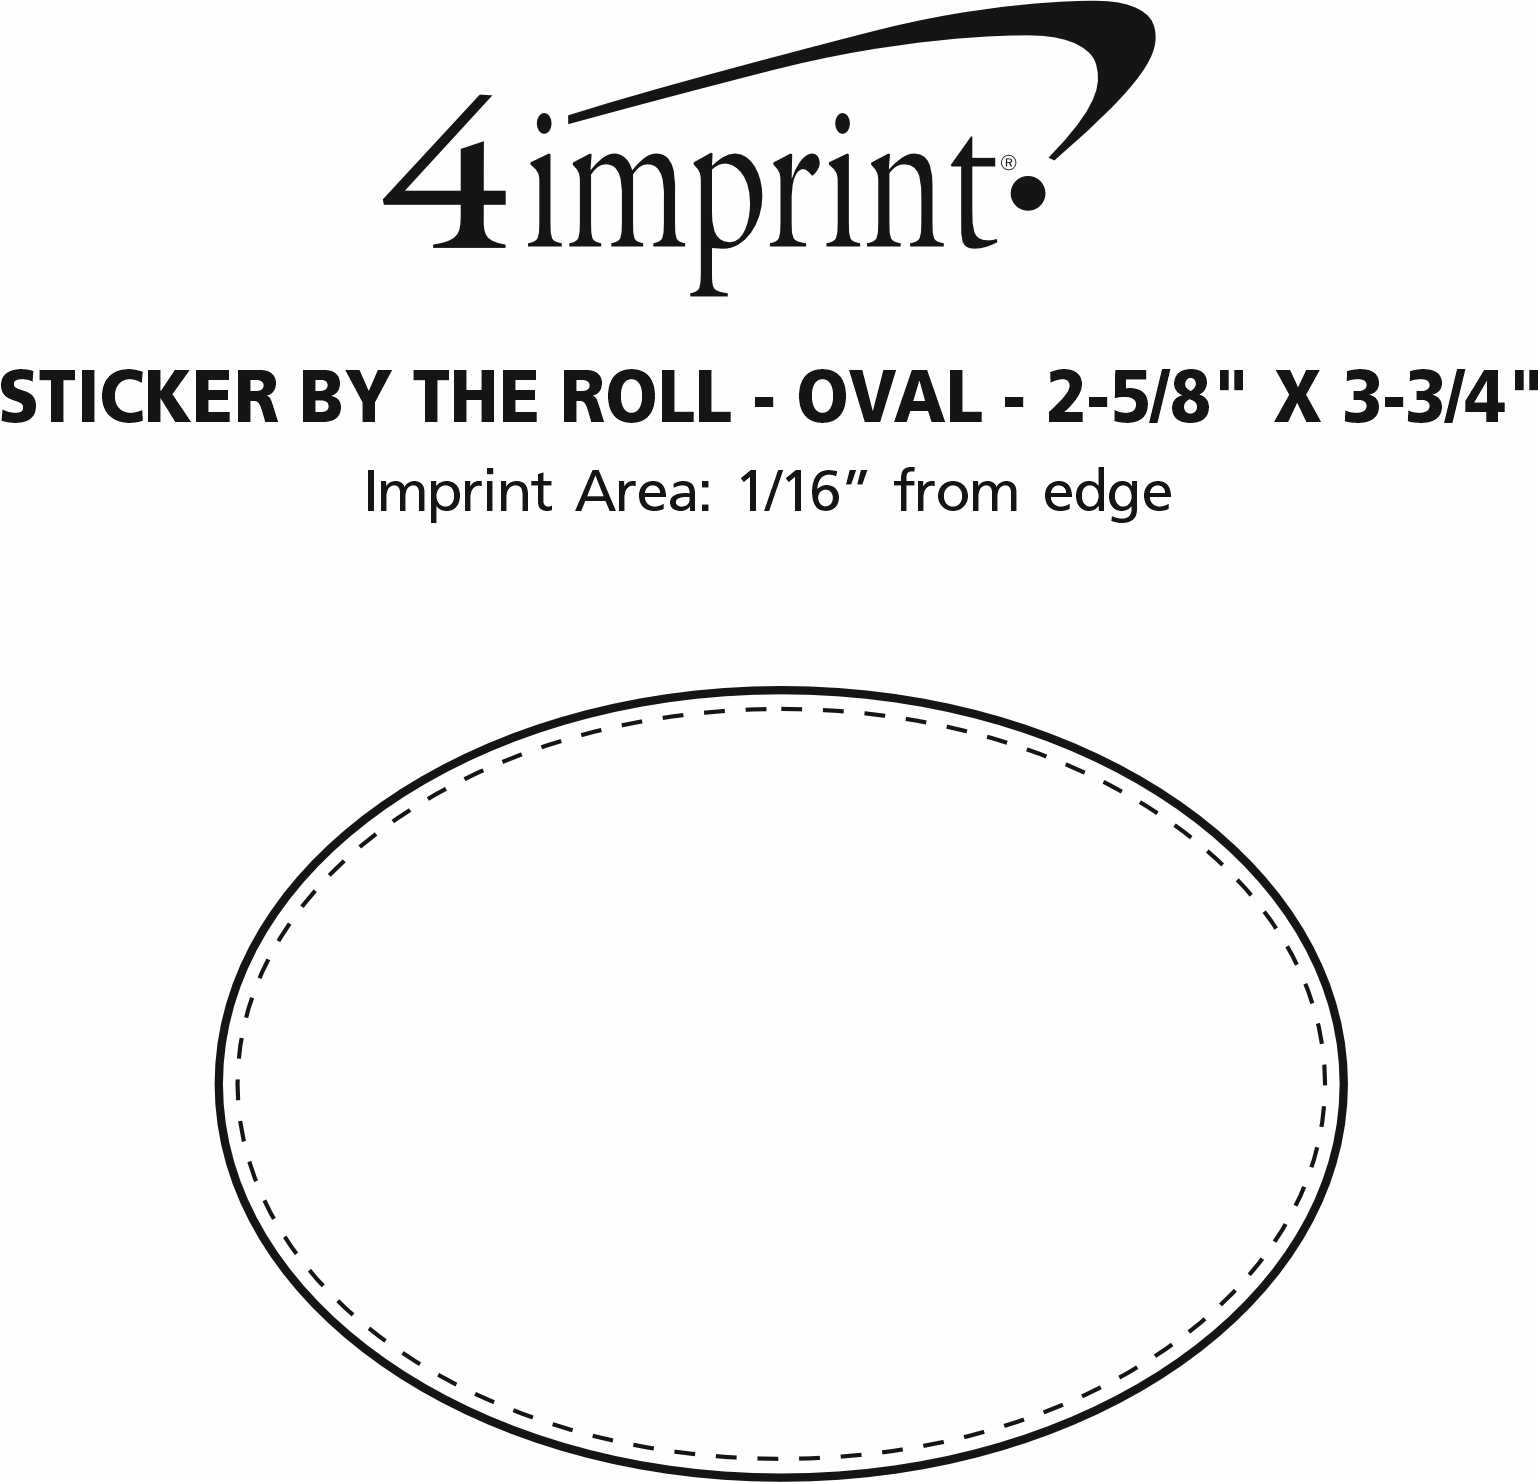 Imprint Area of Sticker by the Roll - Oval - 2-5/8" x 3-3/4"